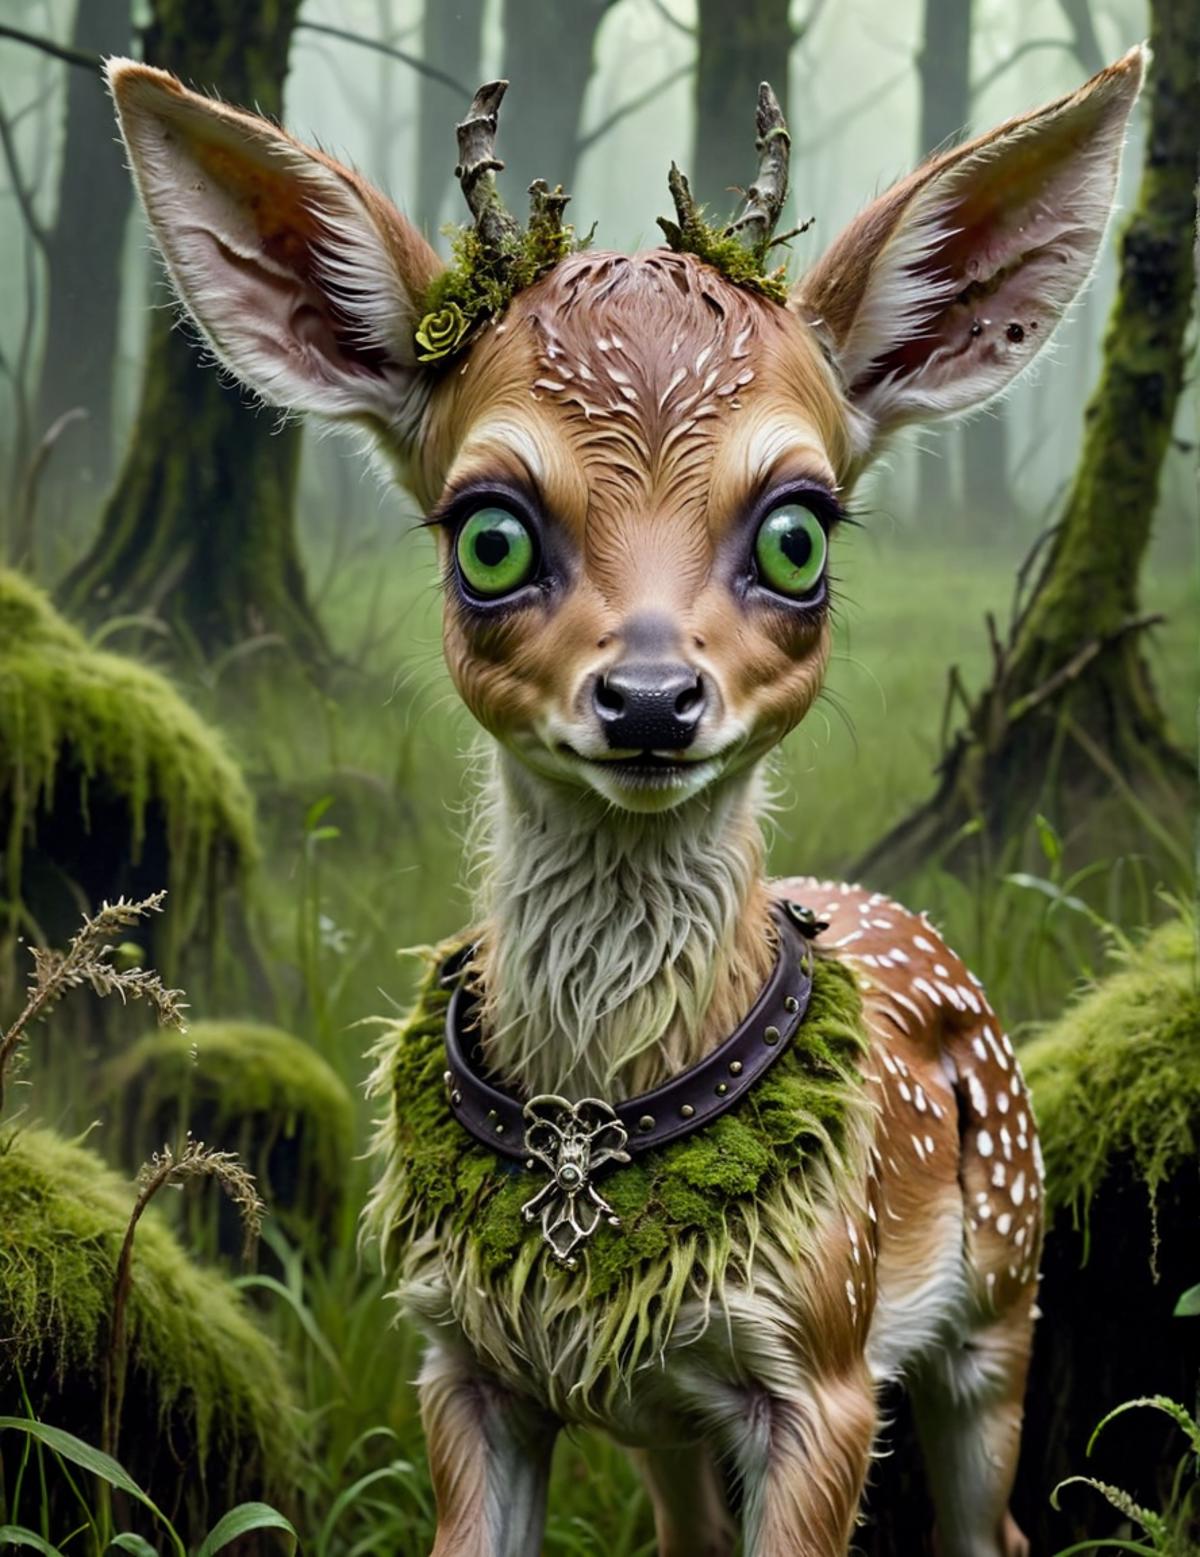 A deer wearing a necklace in a forest with green eyes.